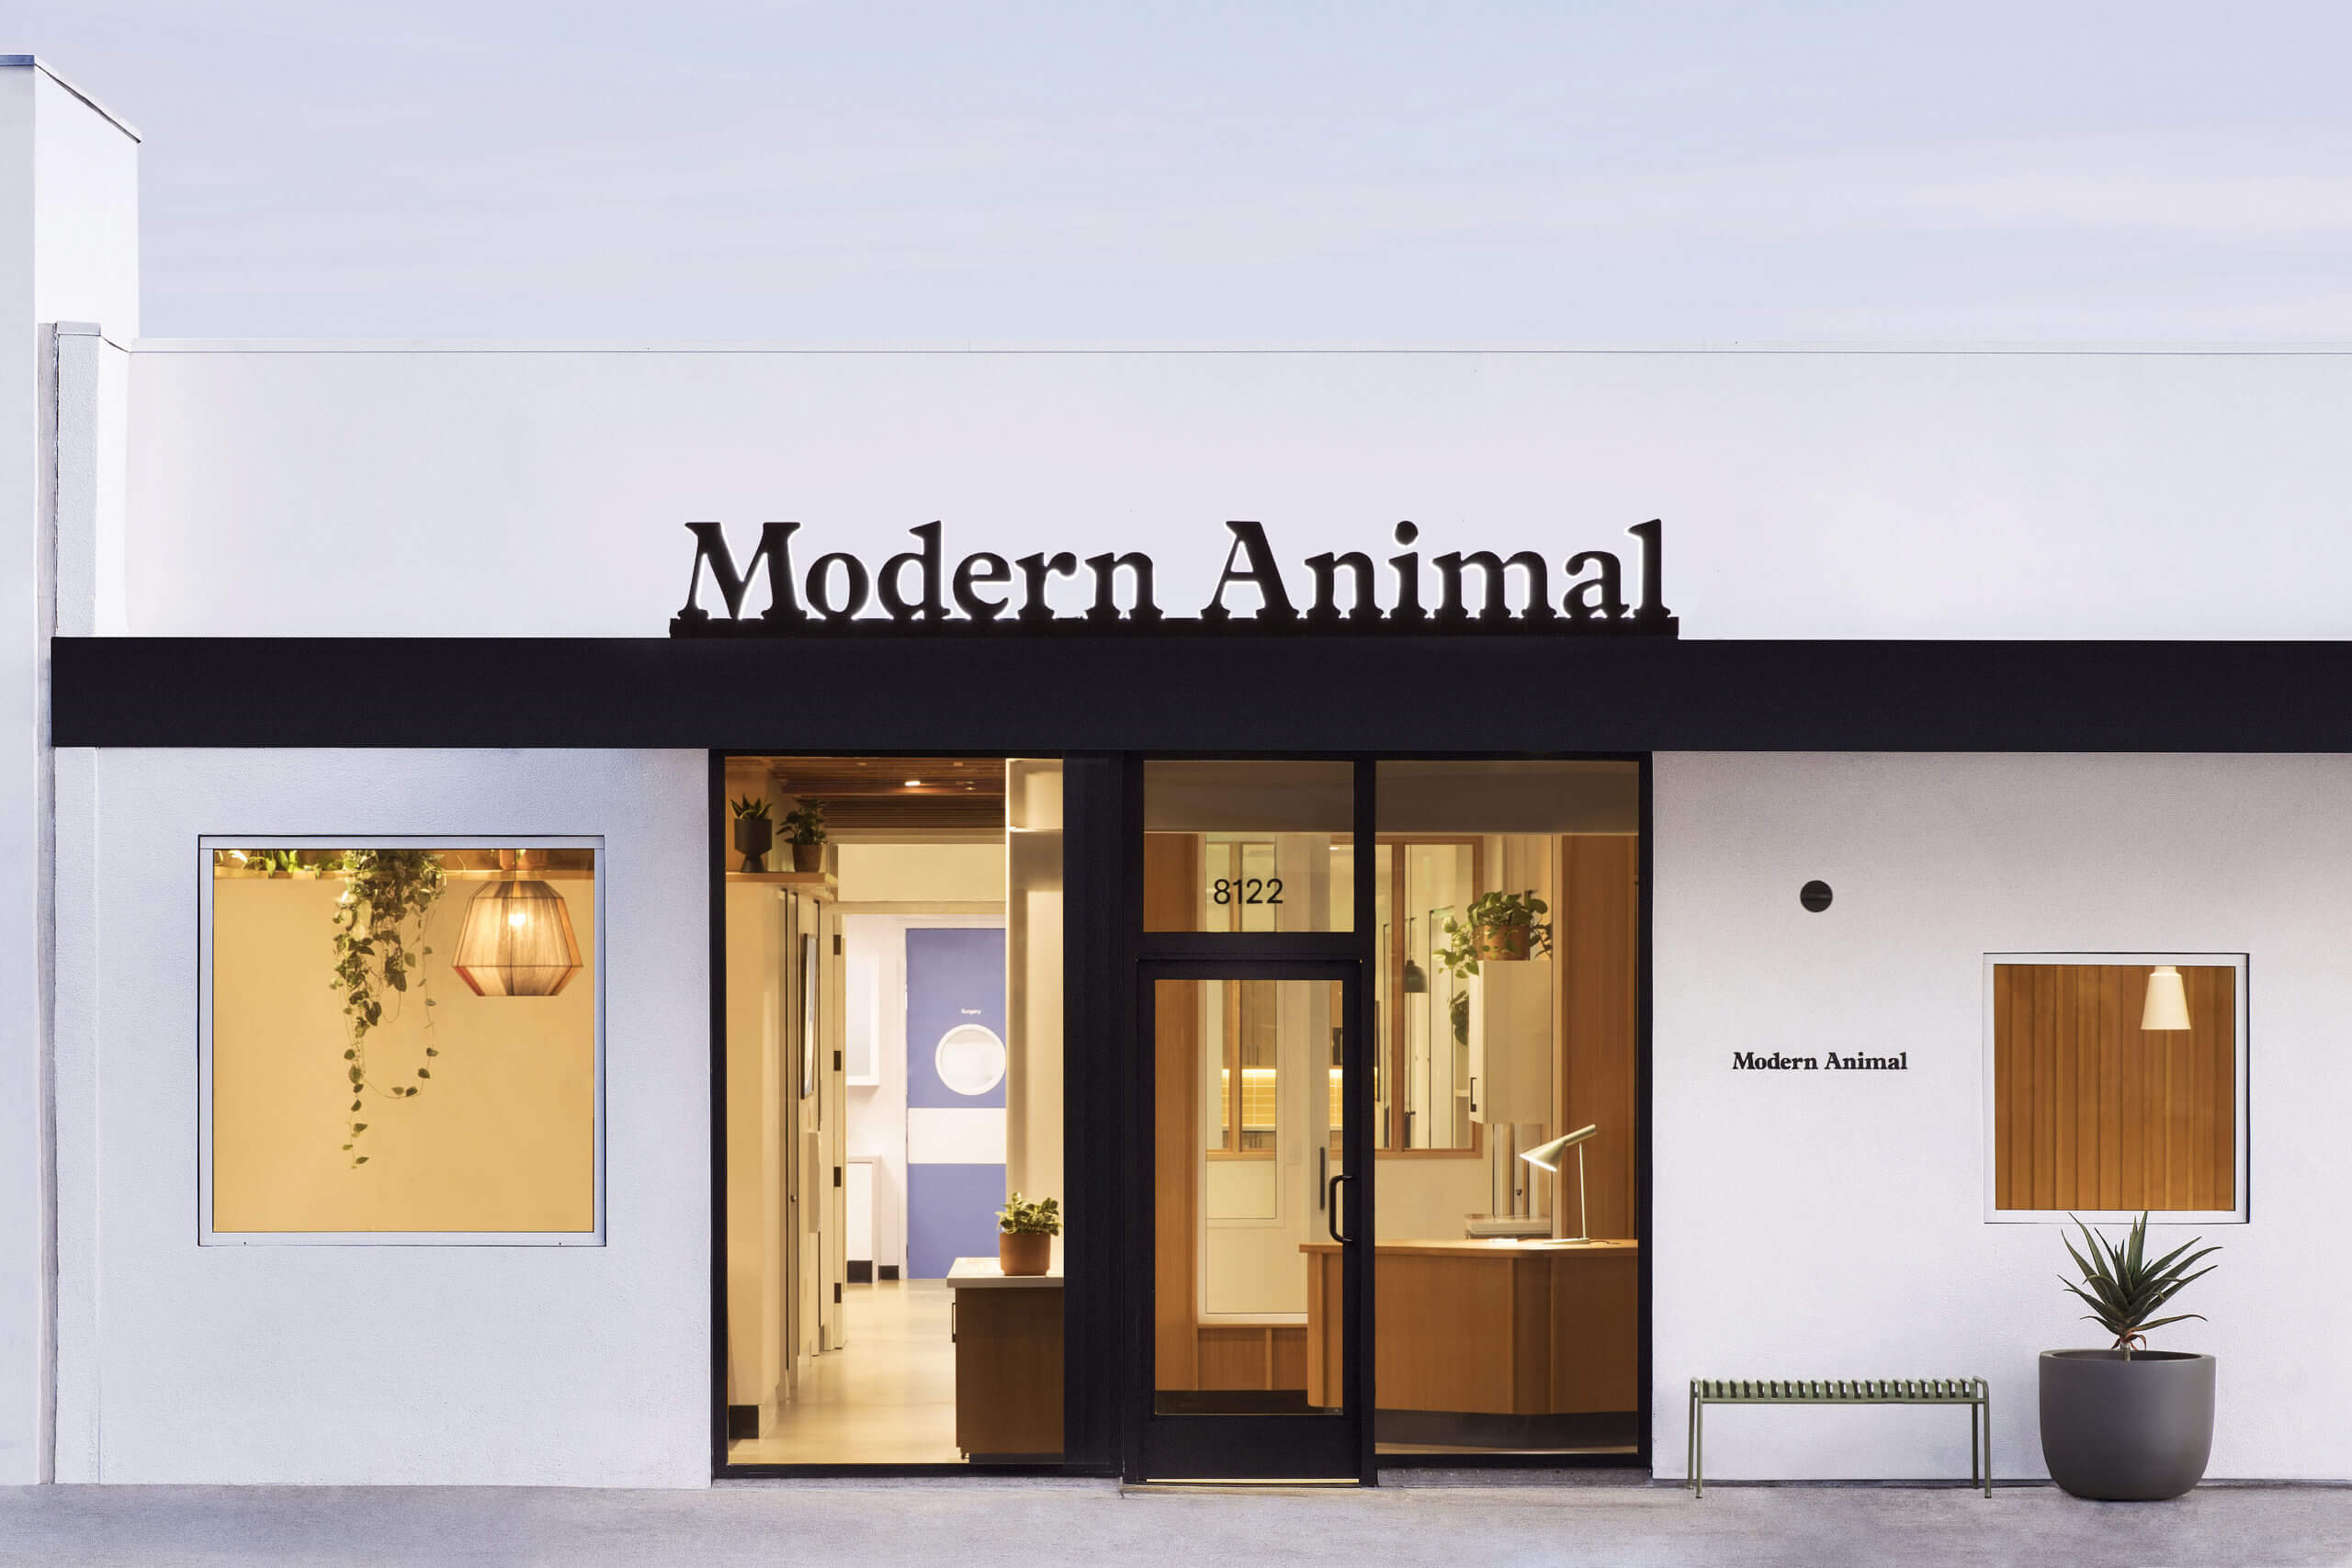 Design, Bitches creates a space for animals that humans can enjoy too